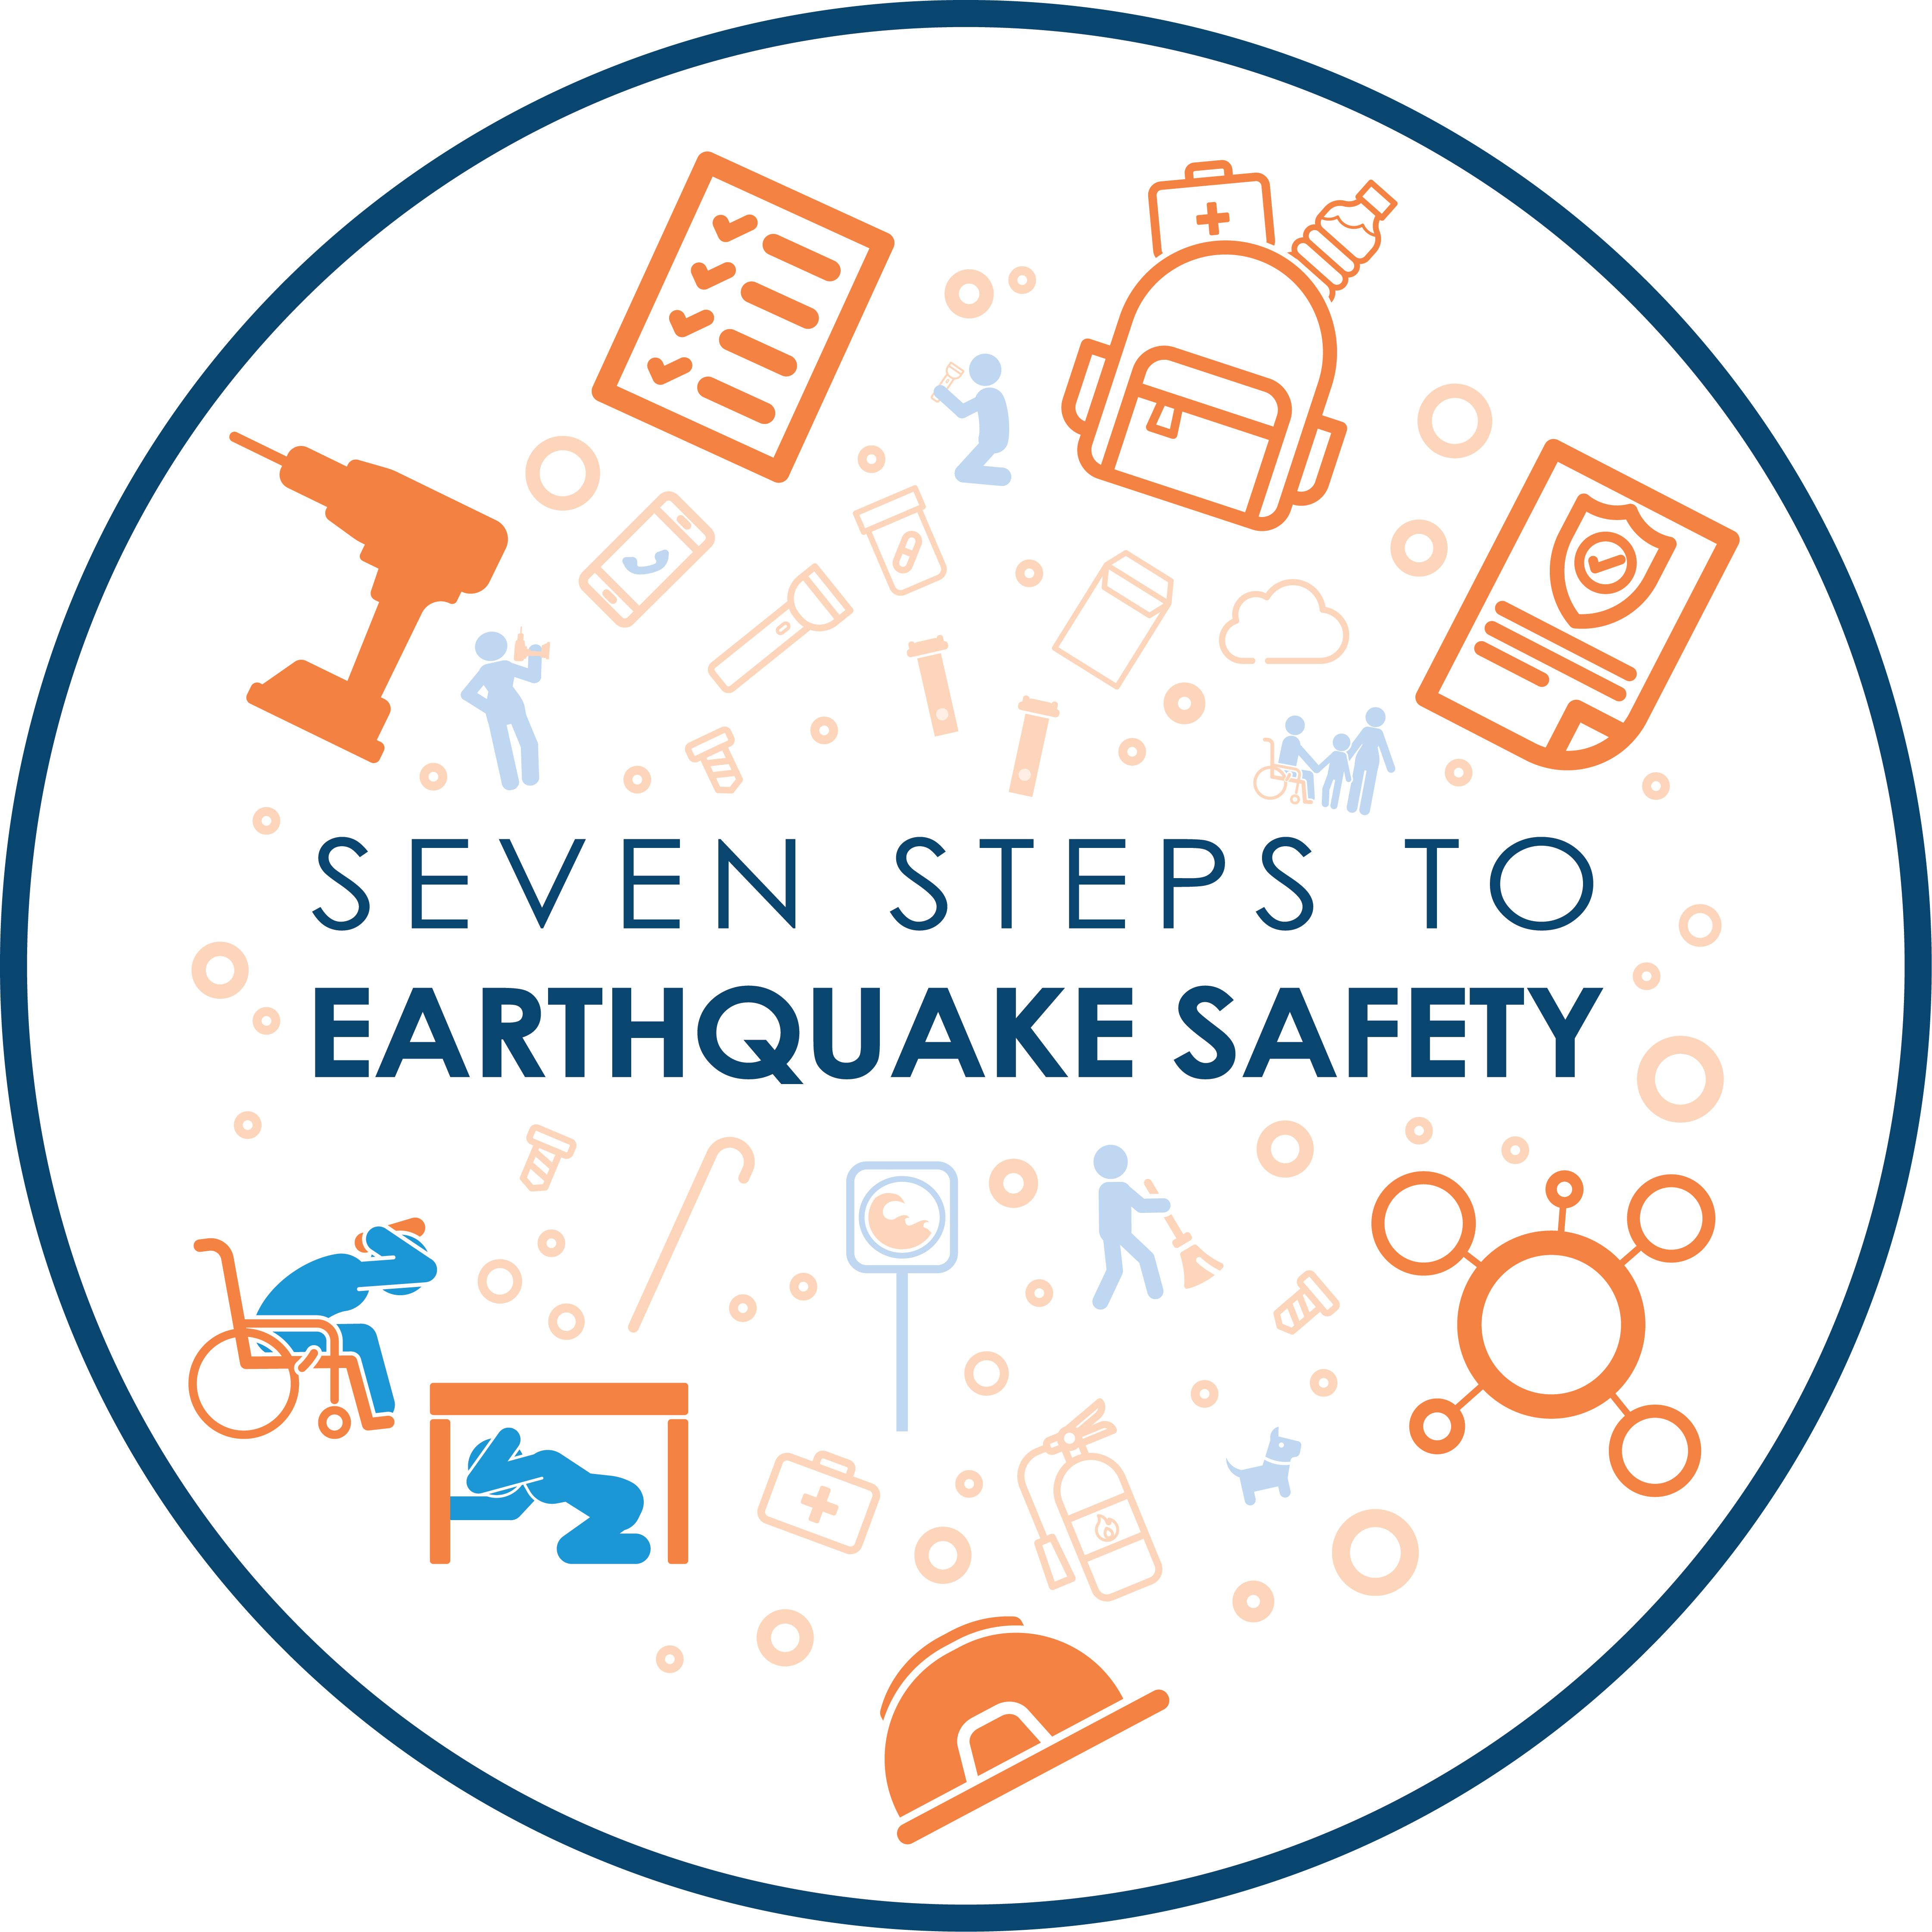 Seven Steps to Earthquake Safety title and graphics